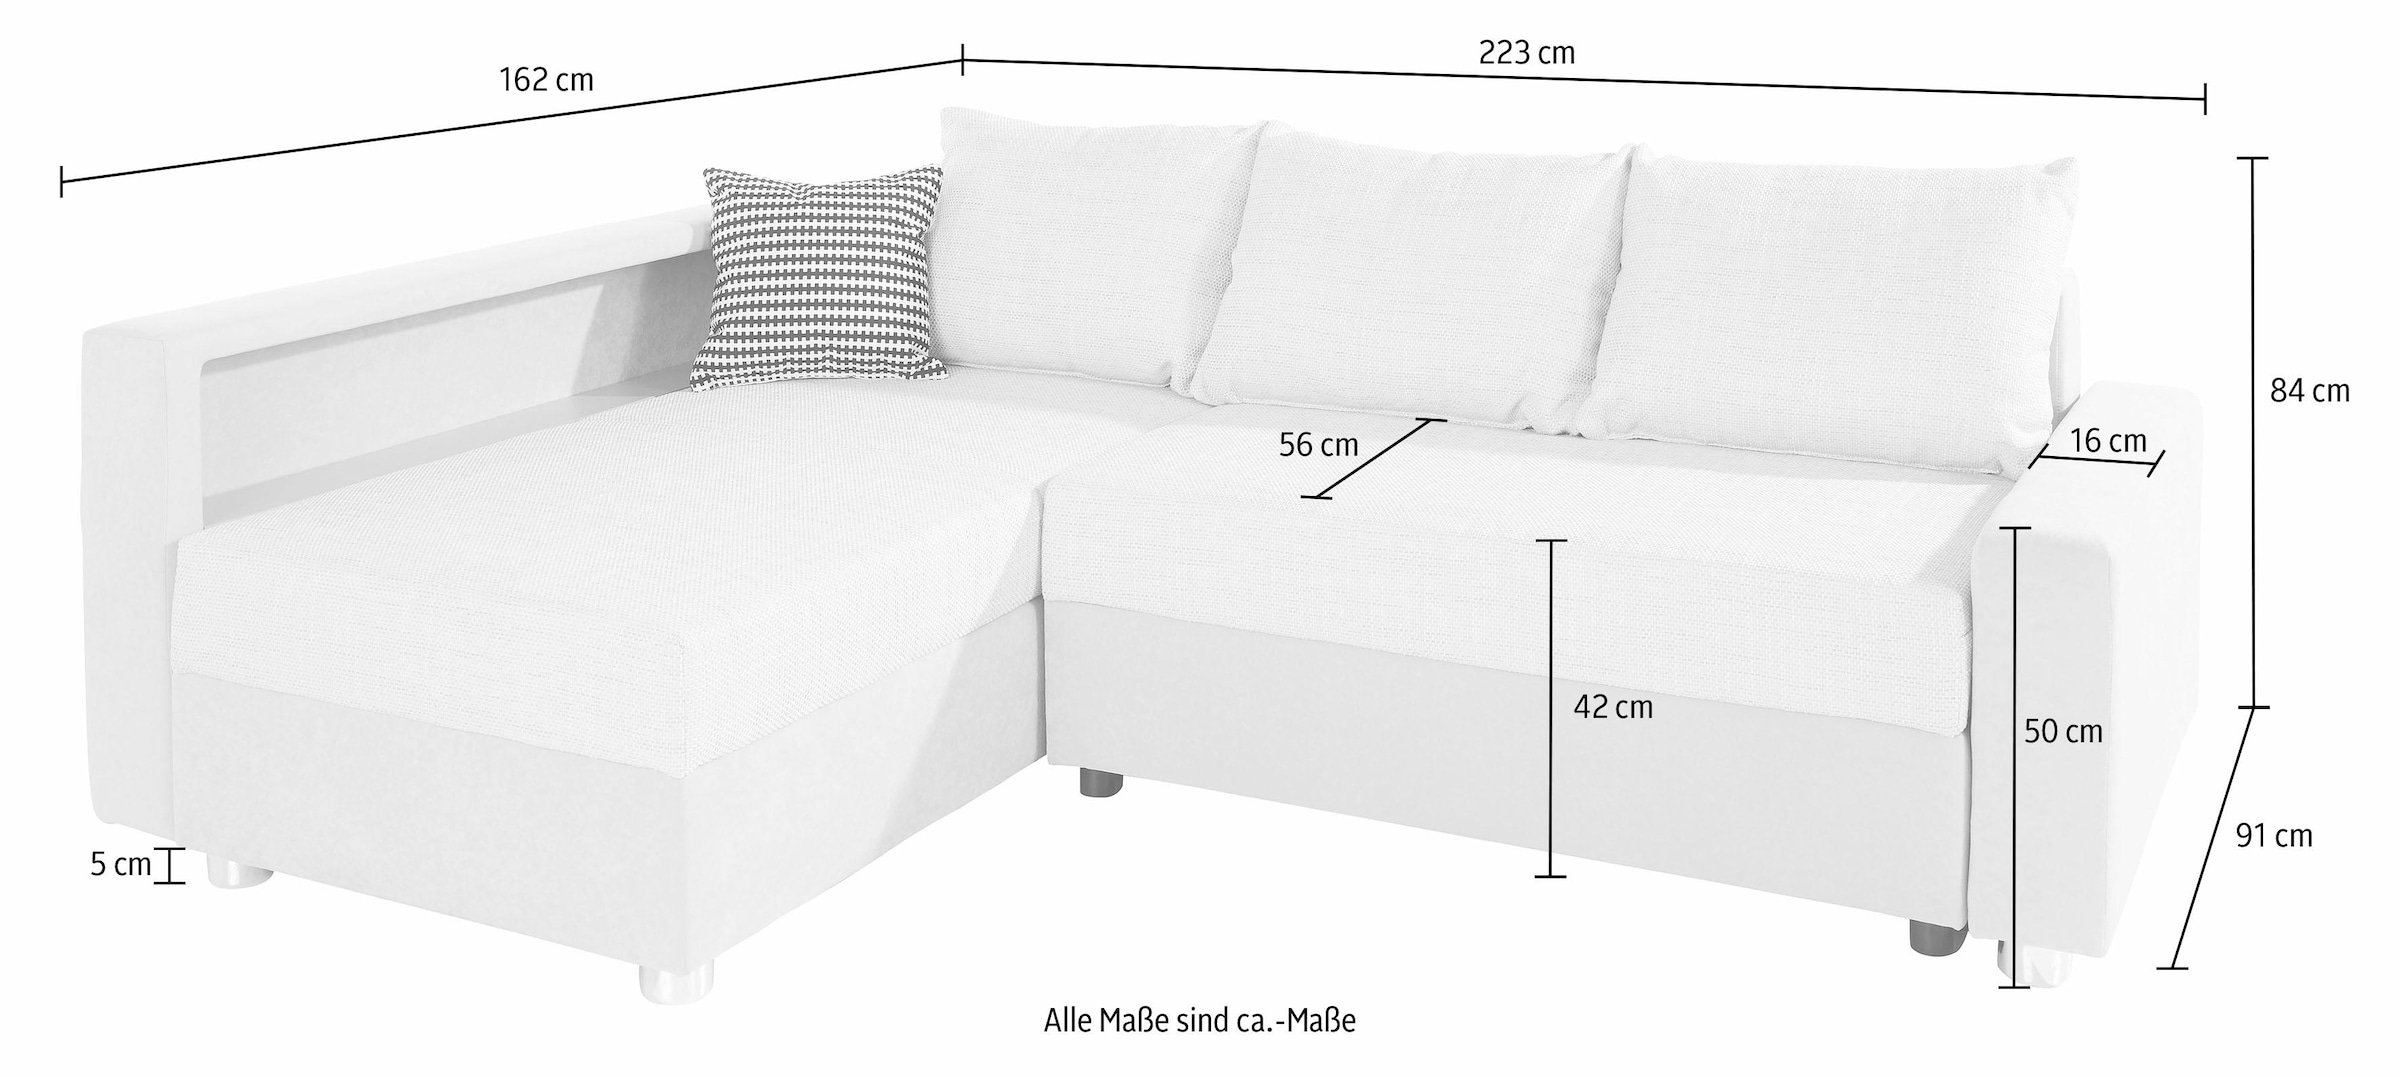 COLLECTION AB mit wahlweise Federkern, RGB-LED-Beleuchtung Bettfunktion, inklusive »Relax«, Ecksofa